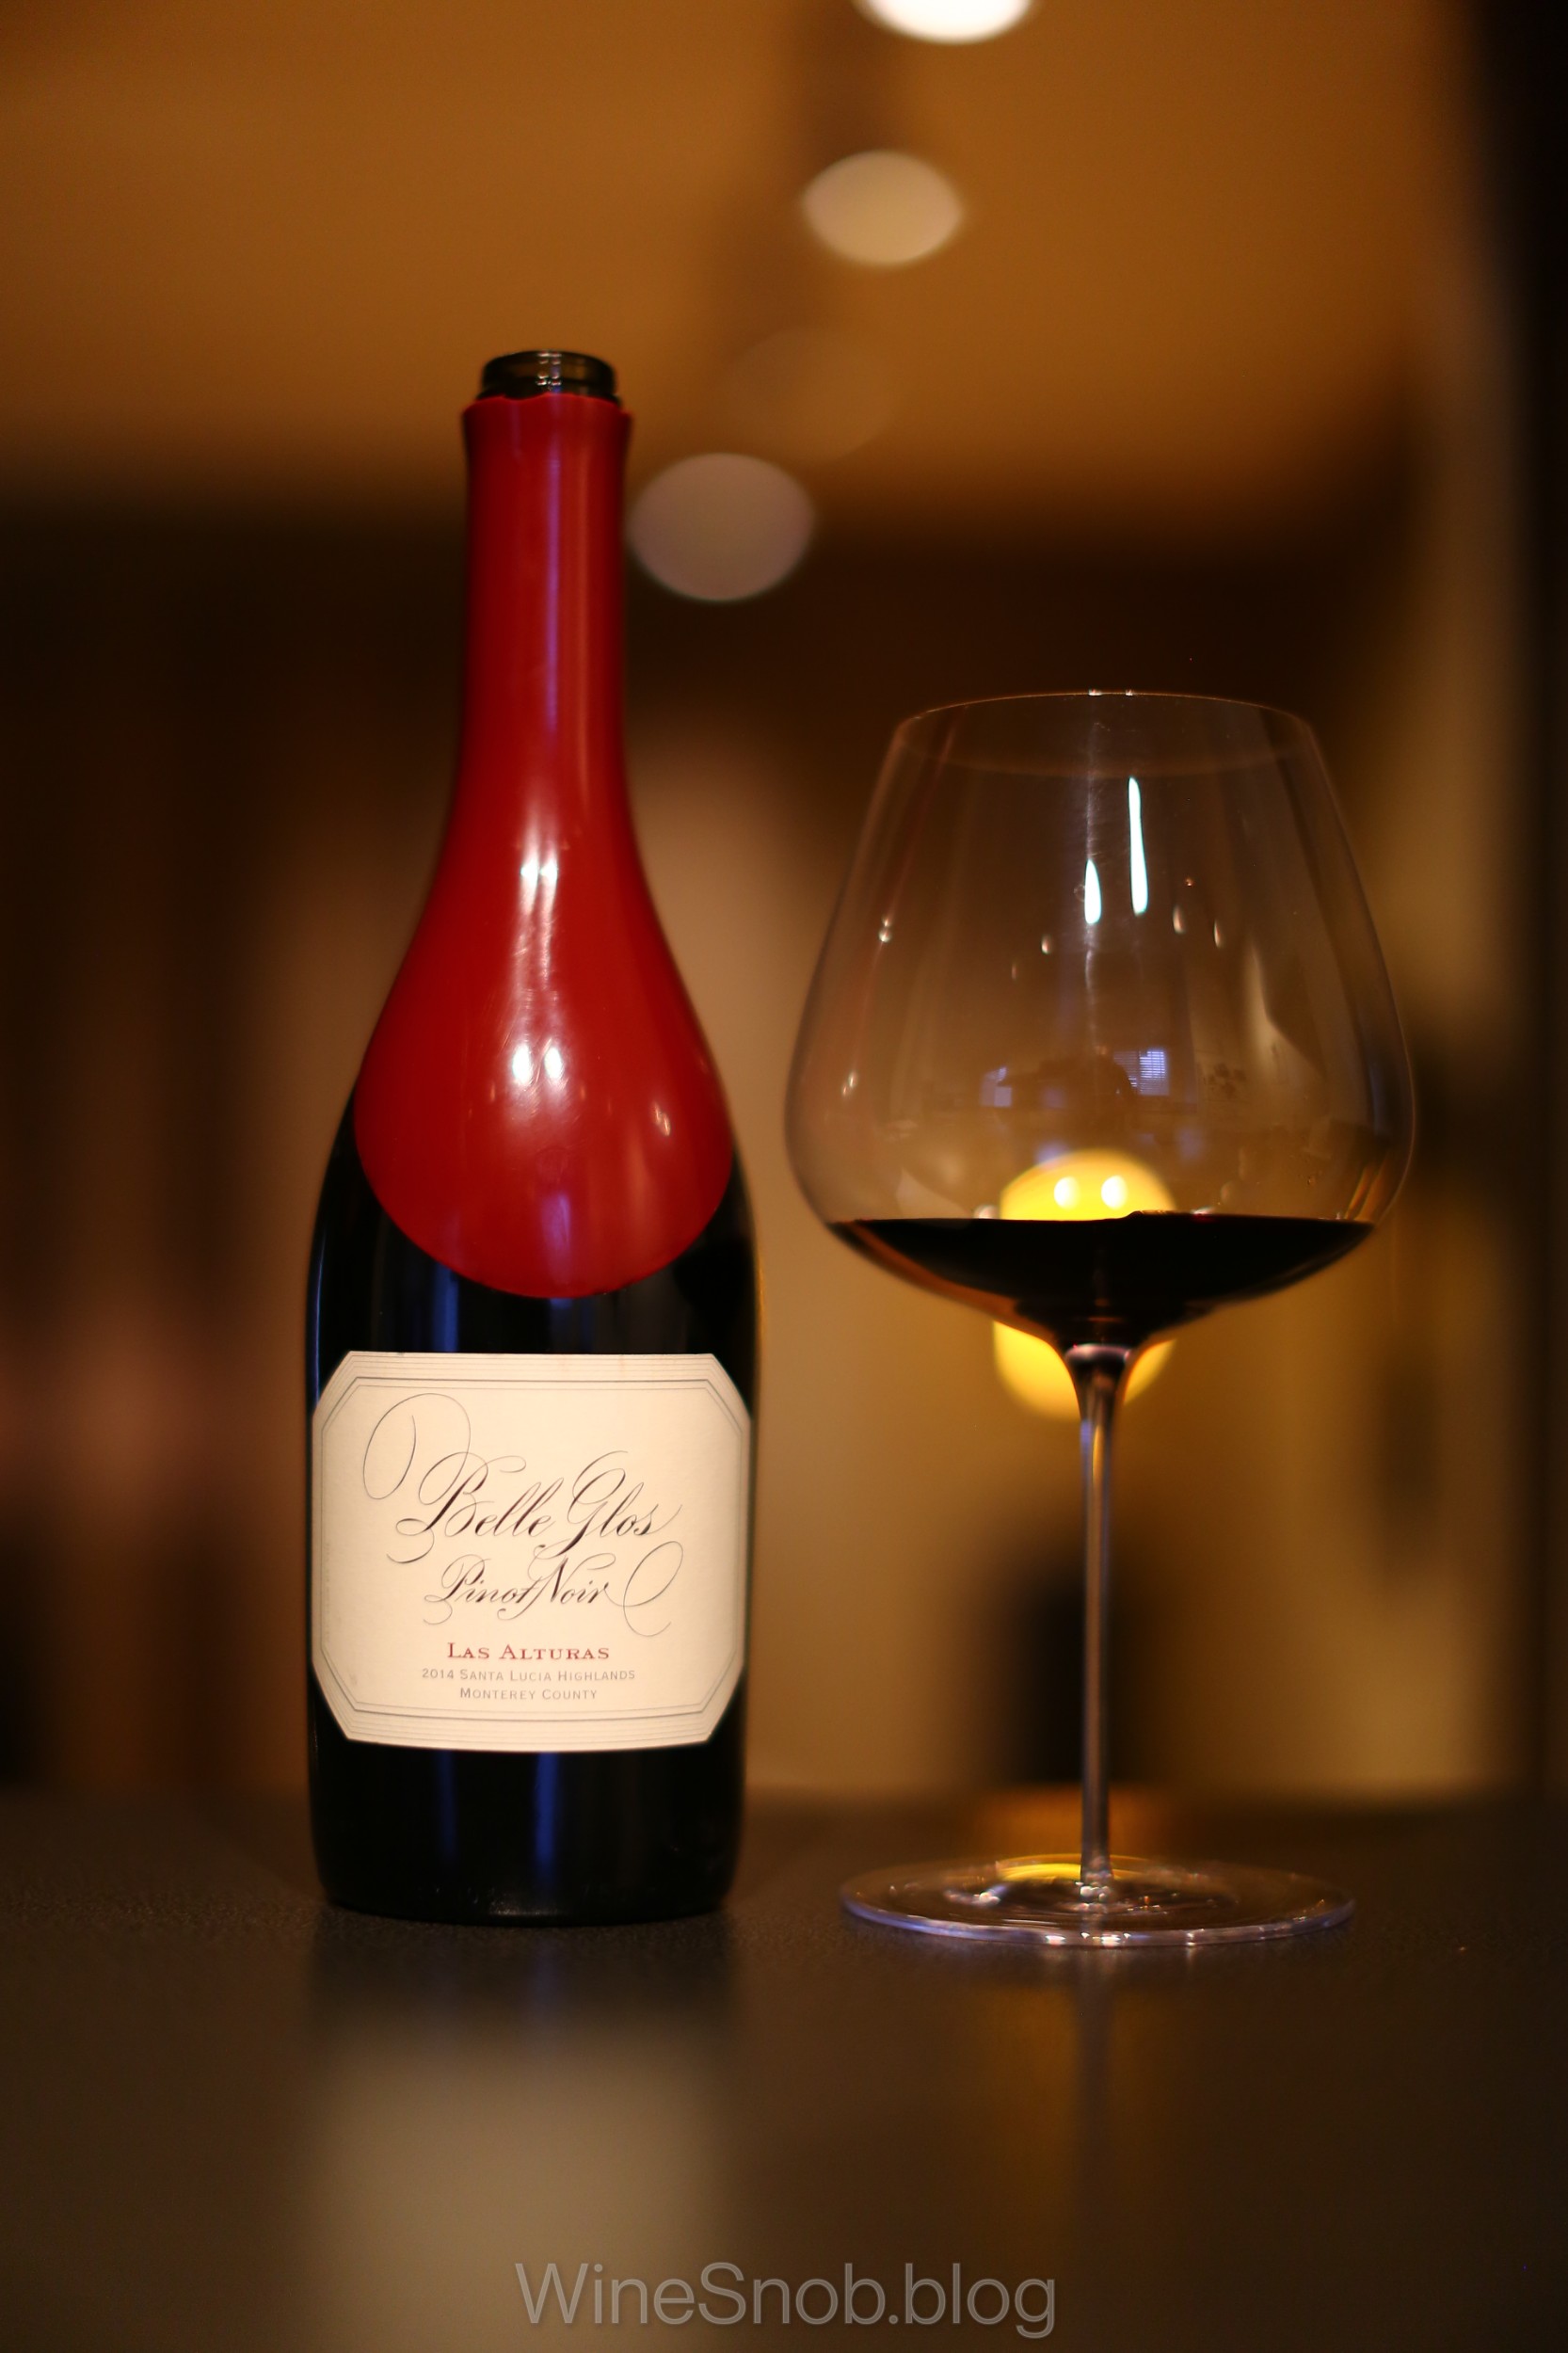 Cloudy Bay Pinot Noir 2014: Beauty in a Glass - Magnolia Days